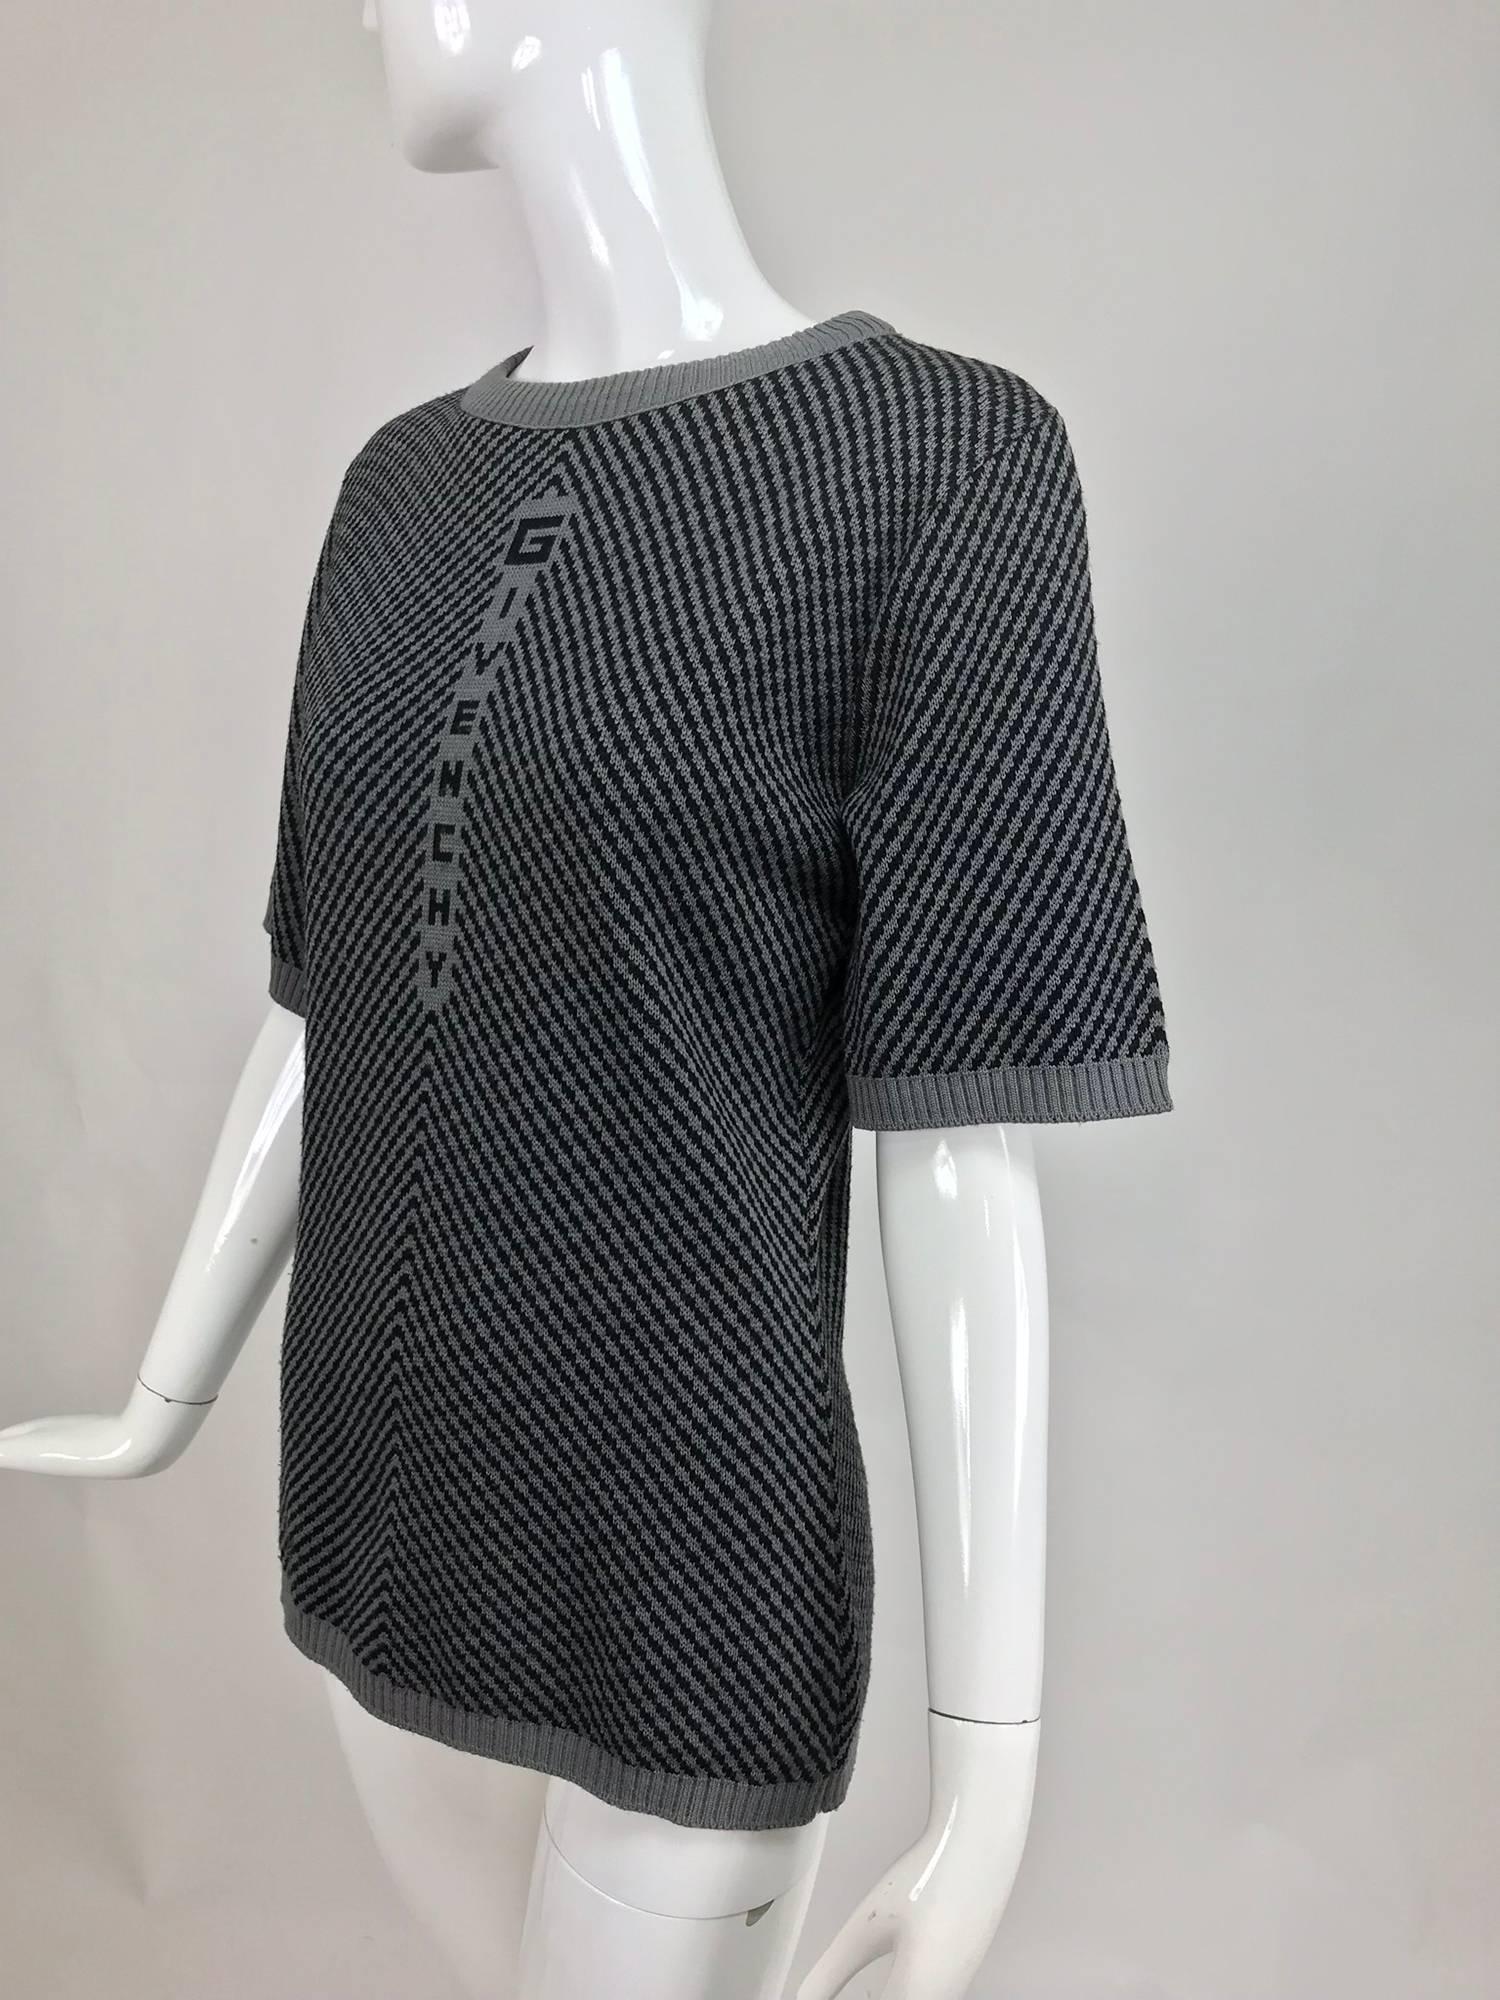 Vintage Givenchy sport 1980s novelty knitted sweater. Dark and light grey geometric knit sweater with Givenchy at the front. Ribbed neckline, cuffs and hem. Pull on sweater, fits like a size Medium.

In excellent wearable condition... All our